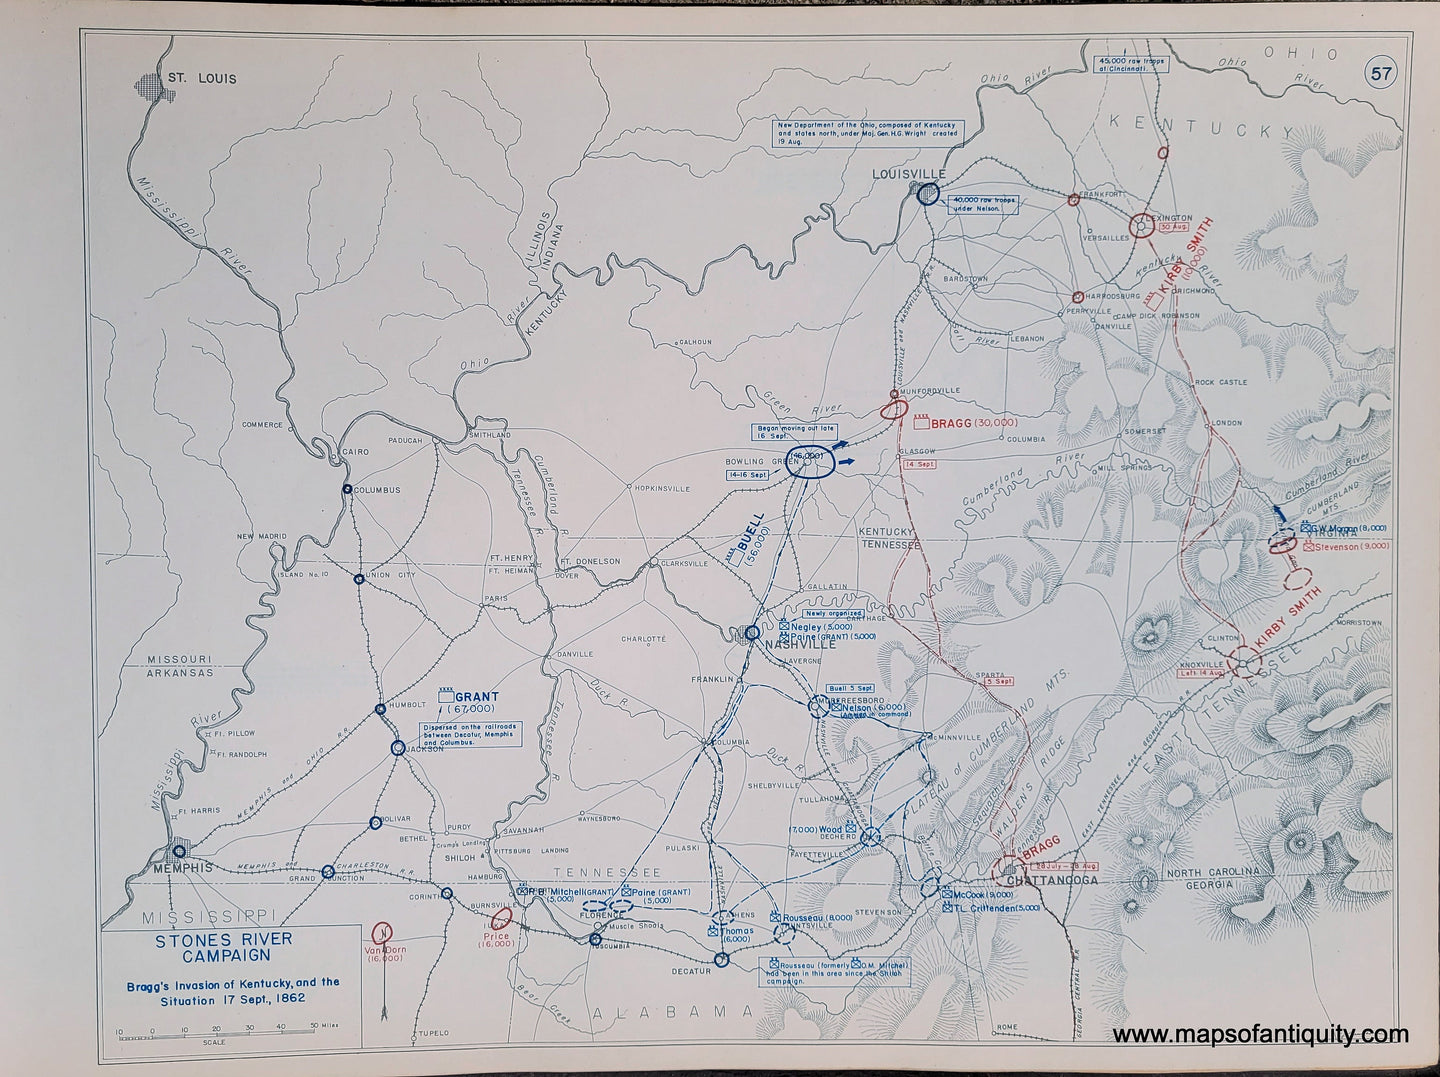 Genuine-Antique-Map-Stones-River-Campaign-Bragg's-Invasion-of-Kentucky-and-the-Situation-17-Sept--1862-1948-Matthew-Forney-Steele-Dept-of-Military-Art-and-Engineering-US-Military-Academy-West-Point-Maps-Of-Antiquity